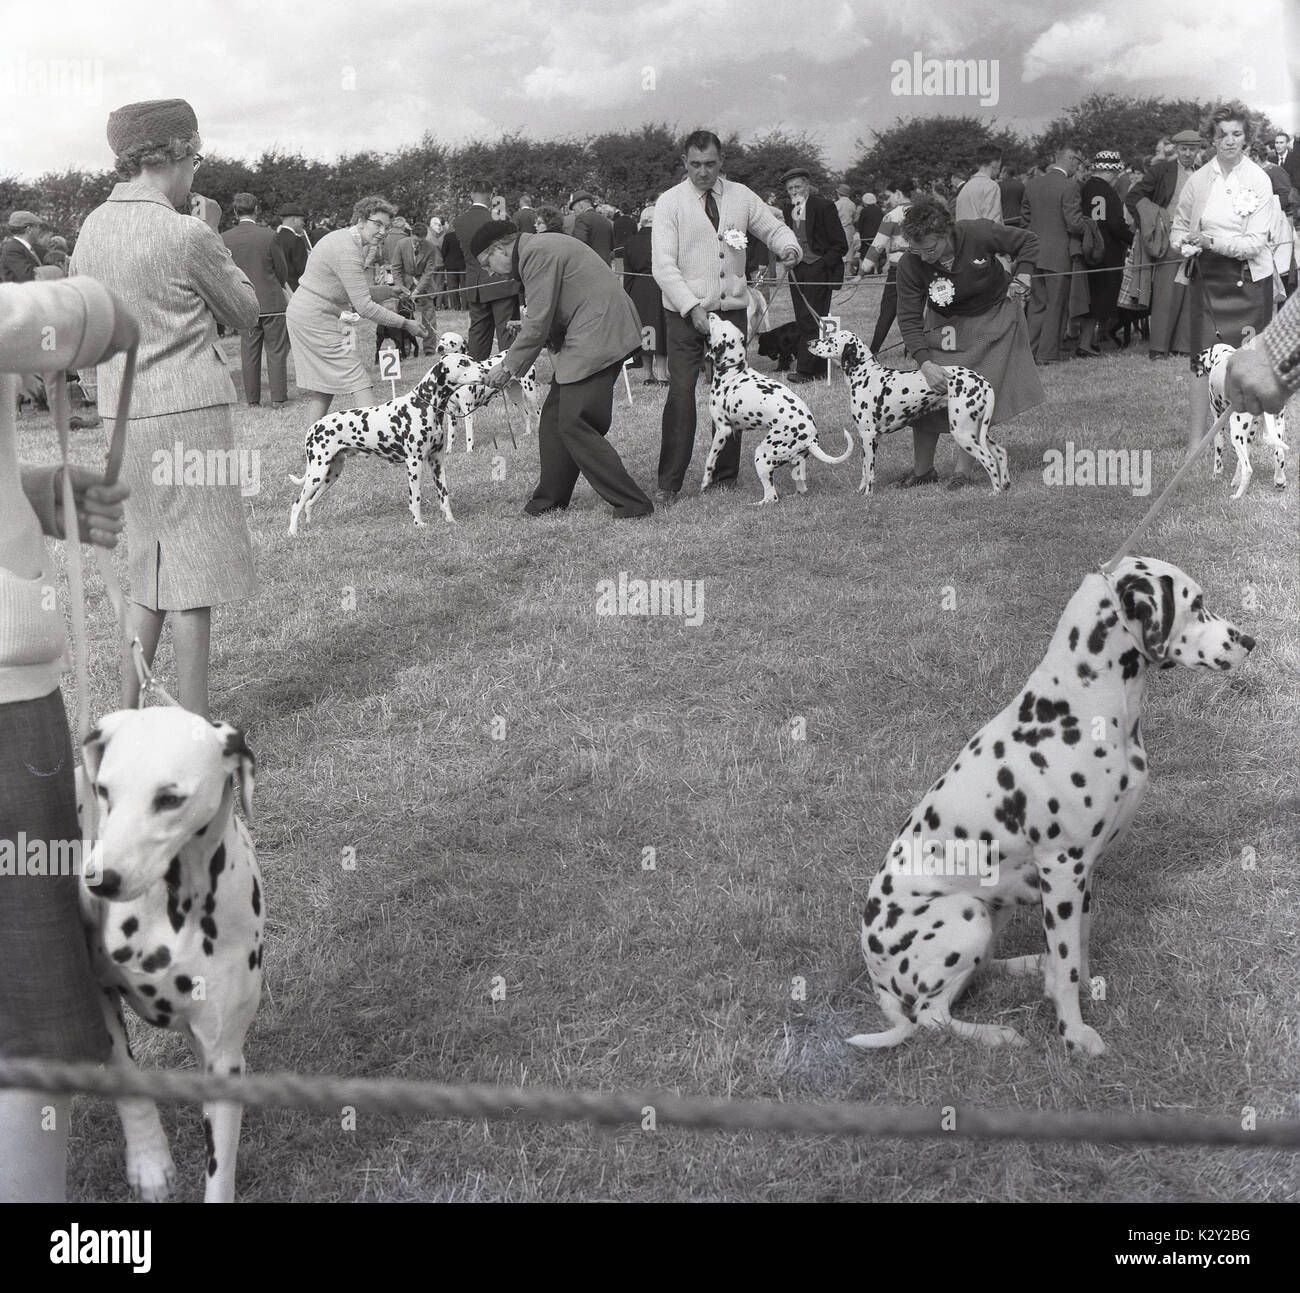 1960s, historical, excited dalmatian dogs wih owners being judged at a countryside county fair, Hertfordshire, England, UK. Stock Photo